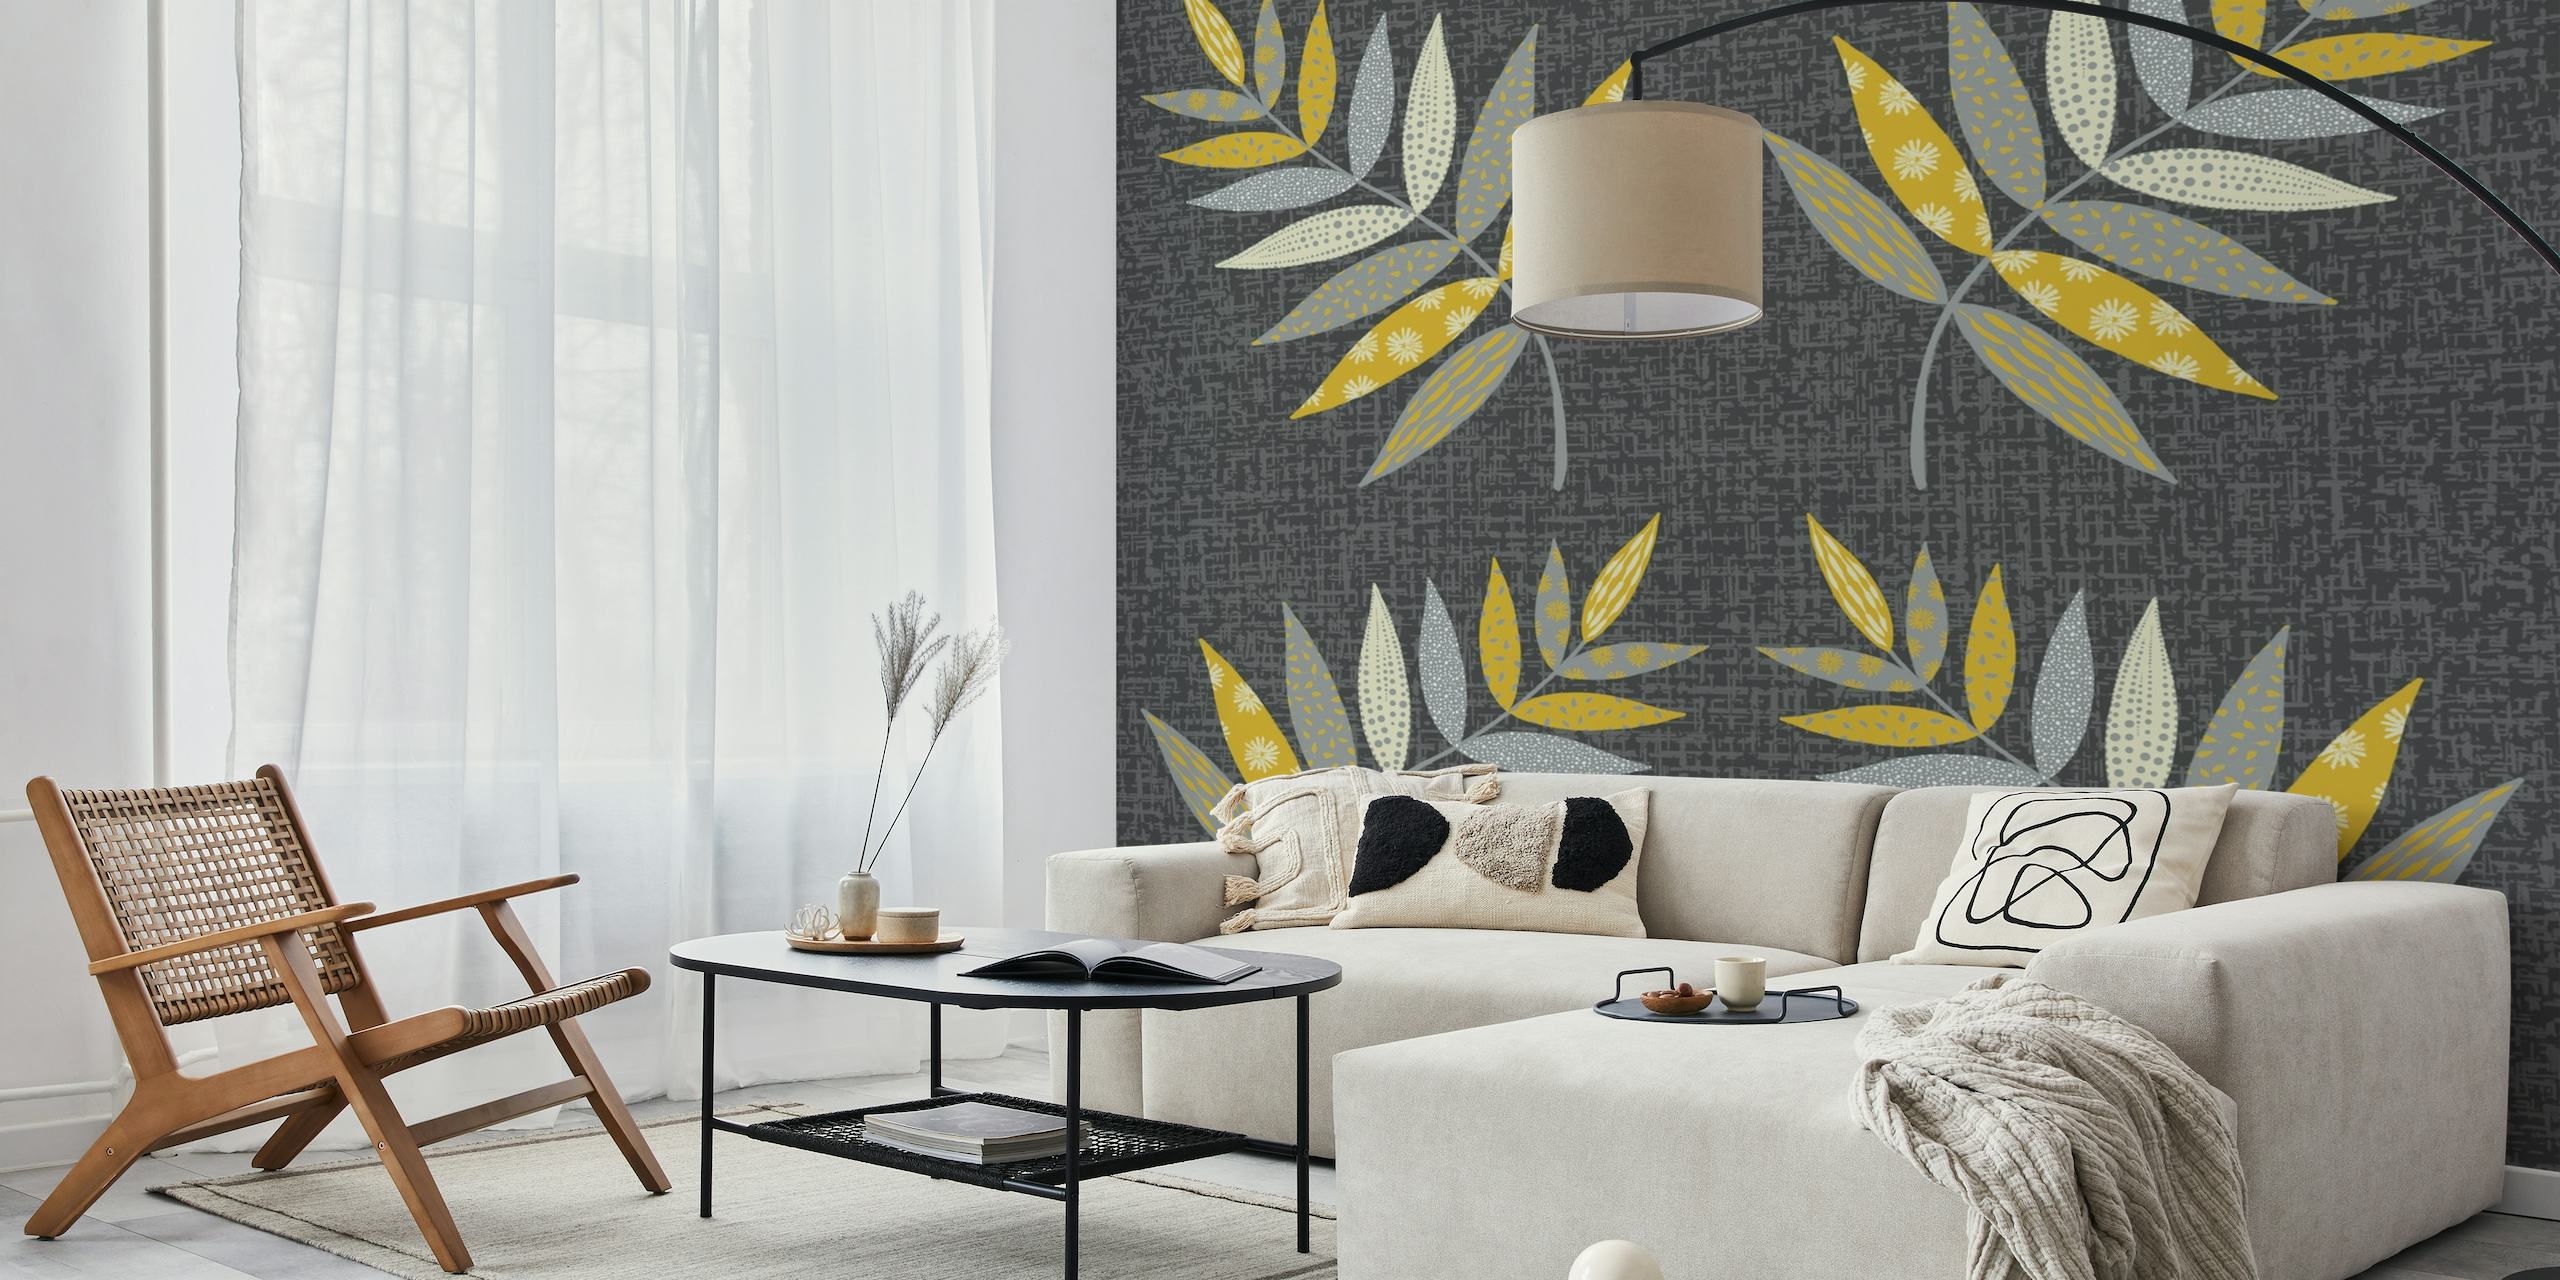 Stylish grey wall mural with patterned leaves in earth tones